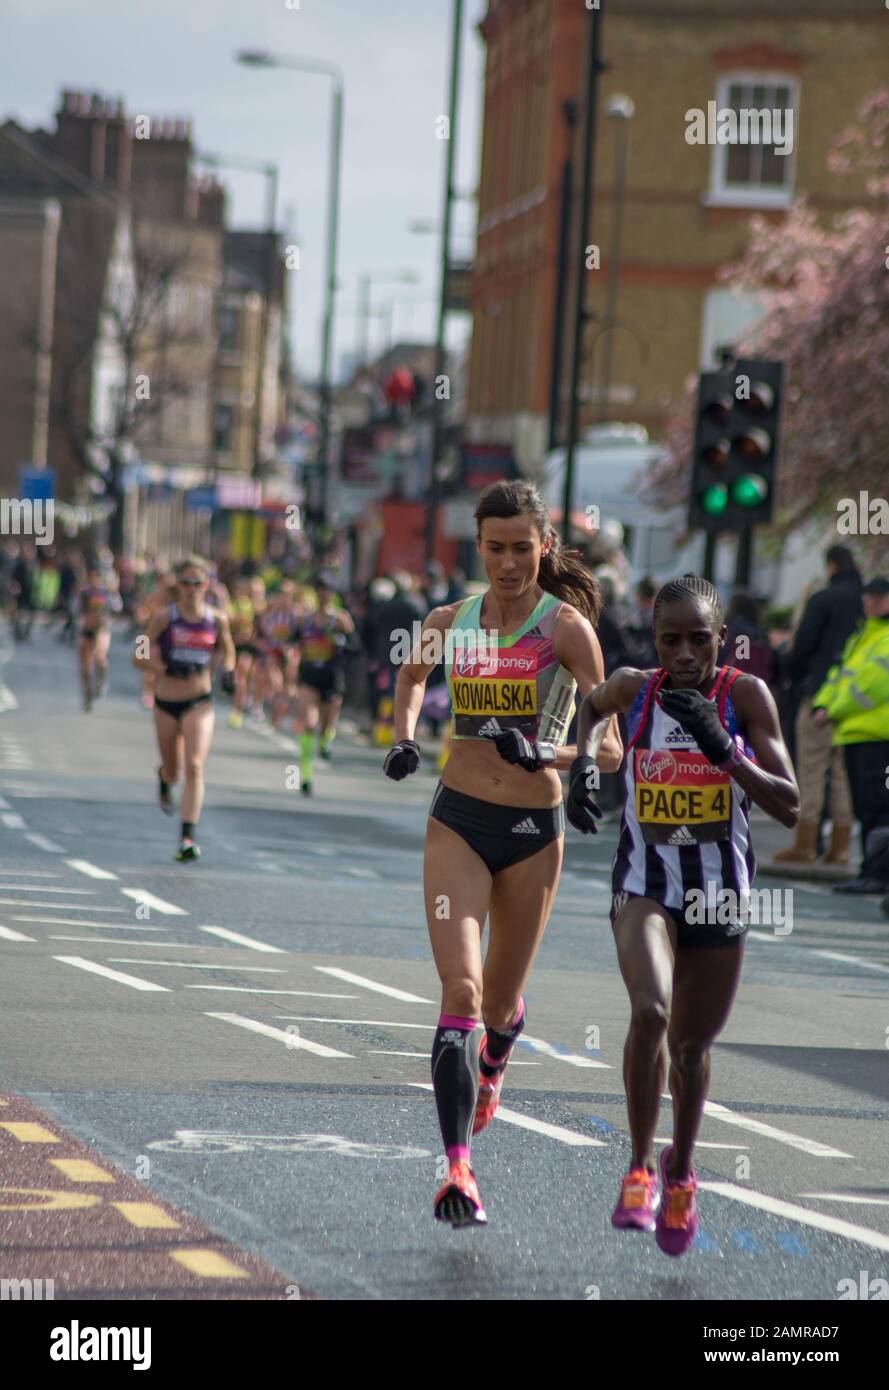 Professional athlete and pace setter running in London Marathon 2016 in London, England Stock Photo